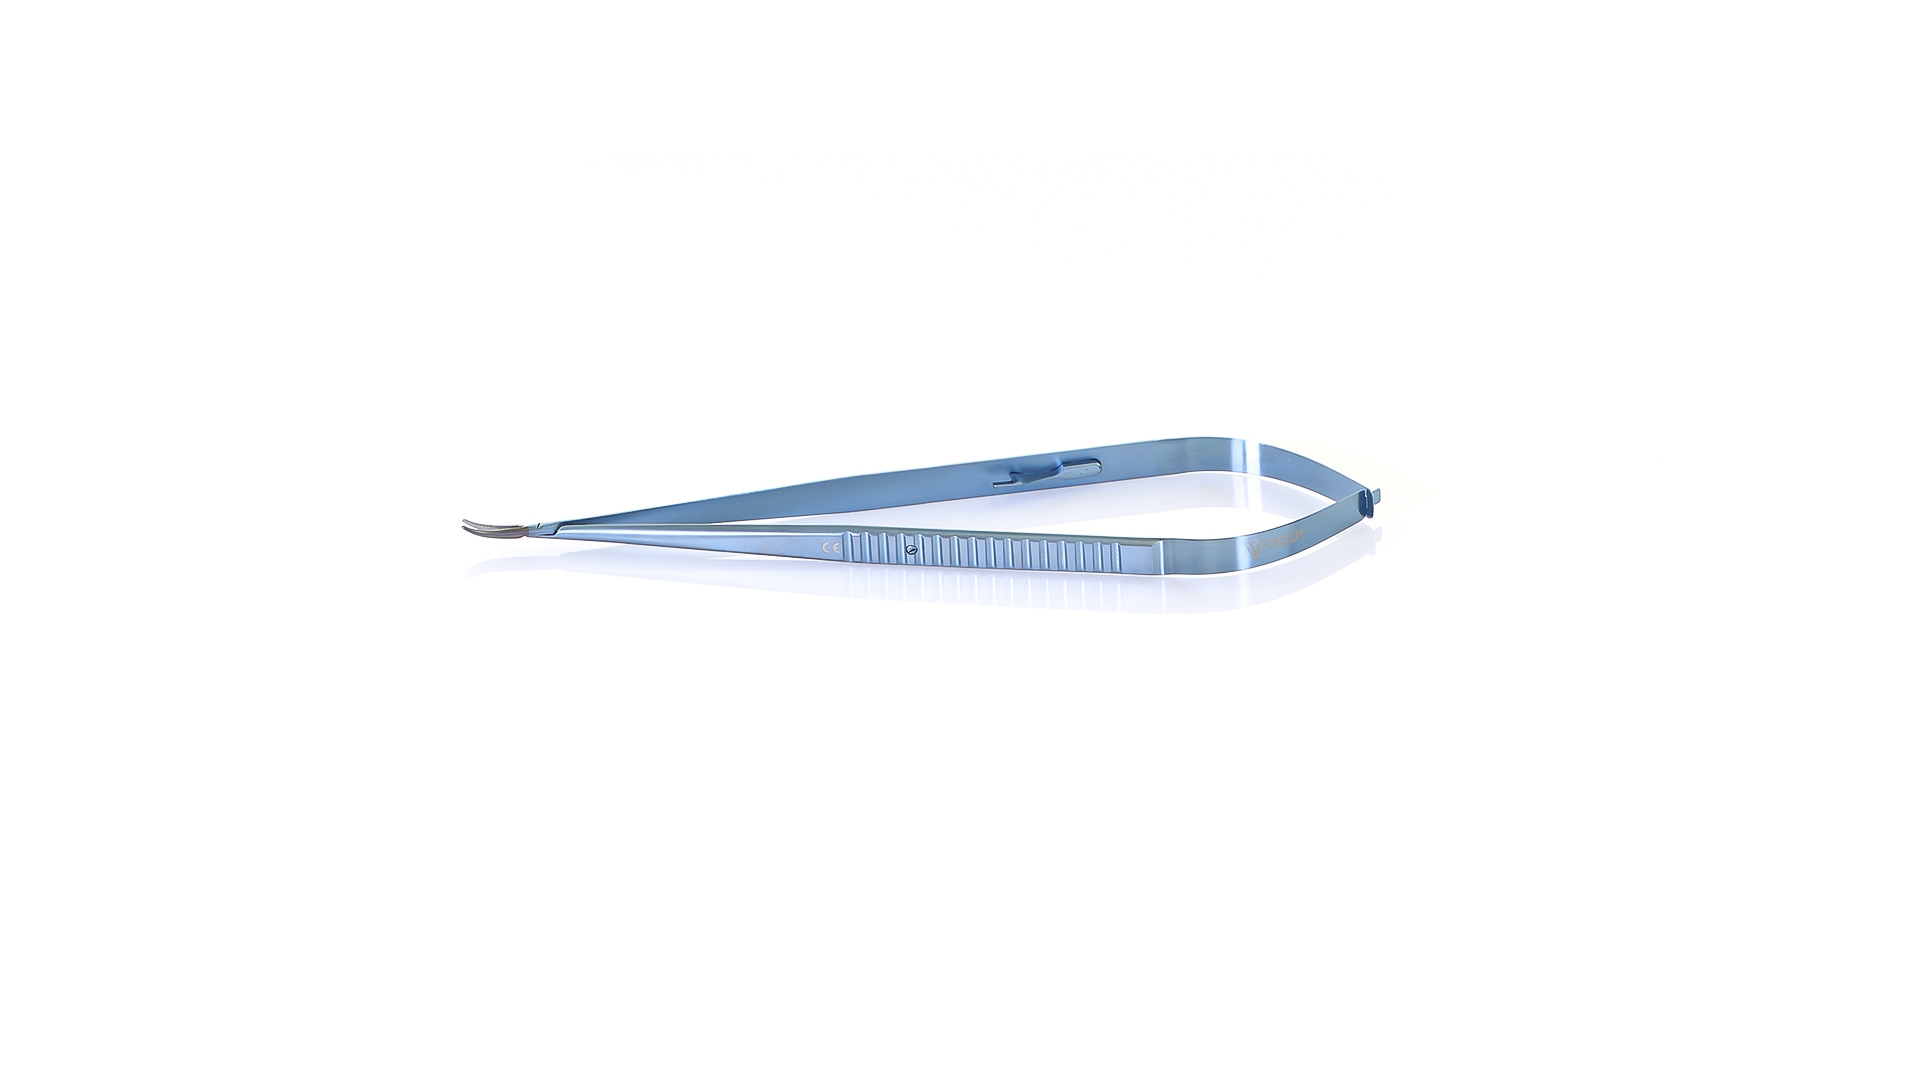 Castroviejo Micro Needle Holder - Curved TC coated jaws